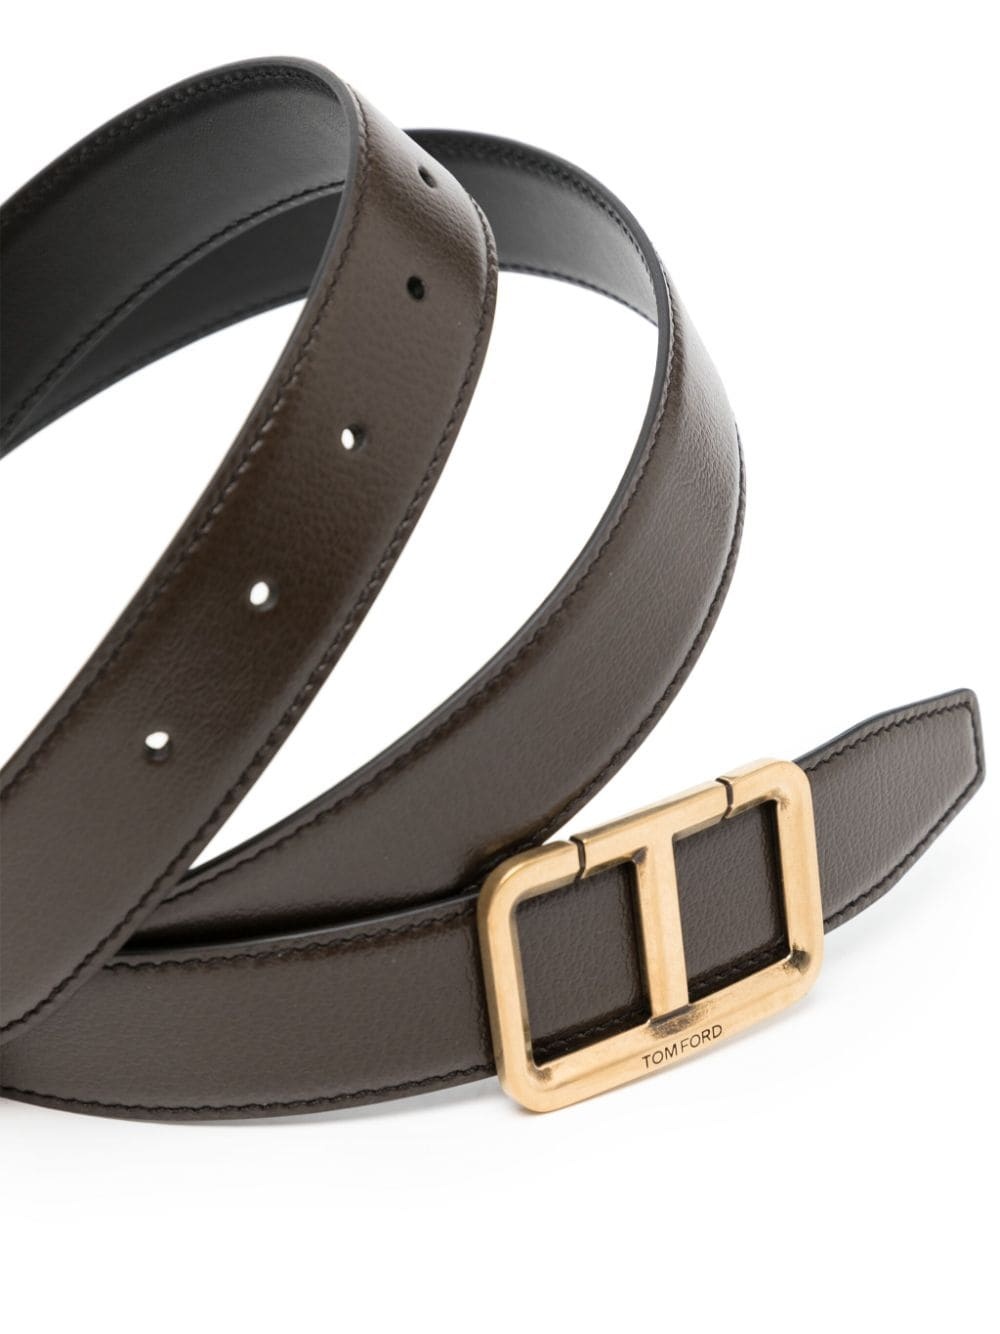 T-buckle leather belt - 2